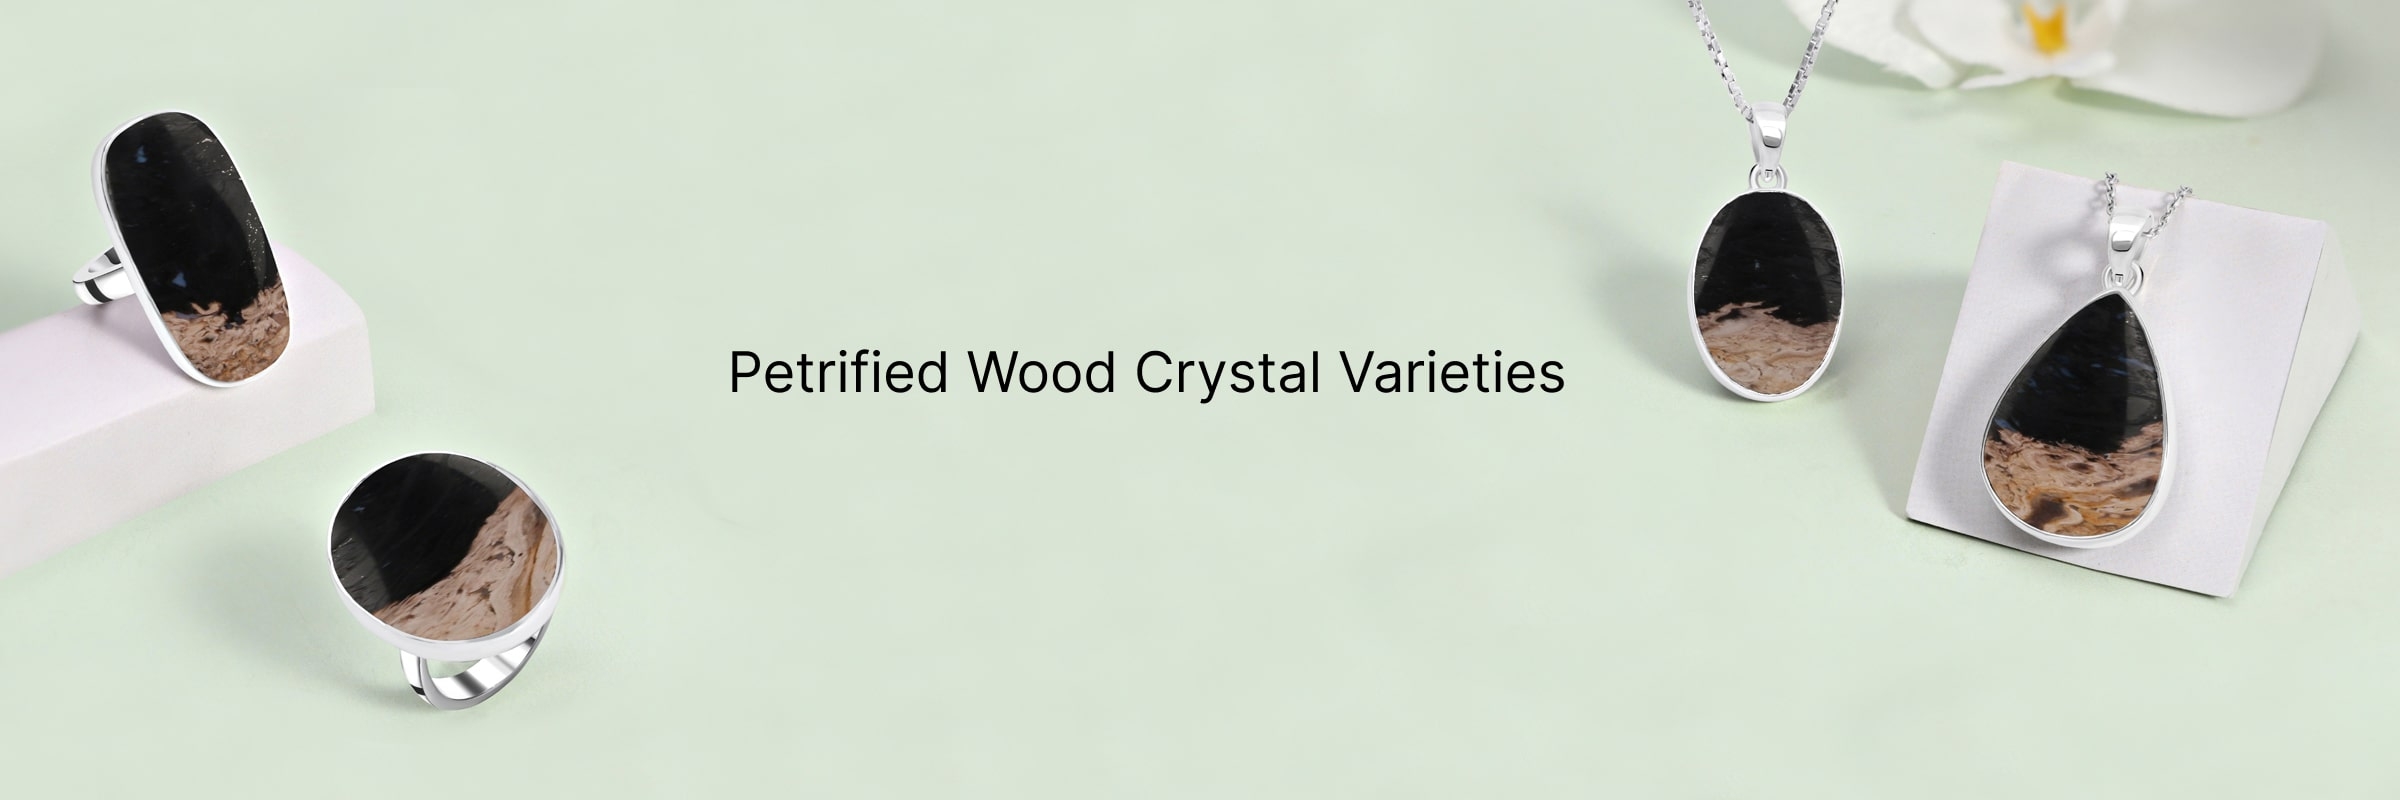 Types of Petrified Wood Crystals